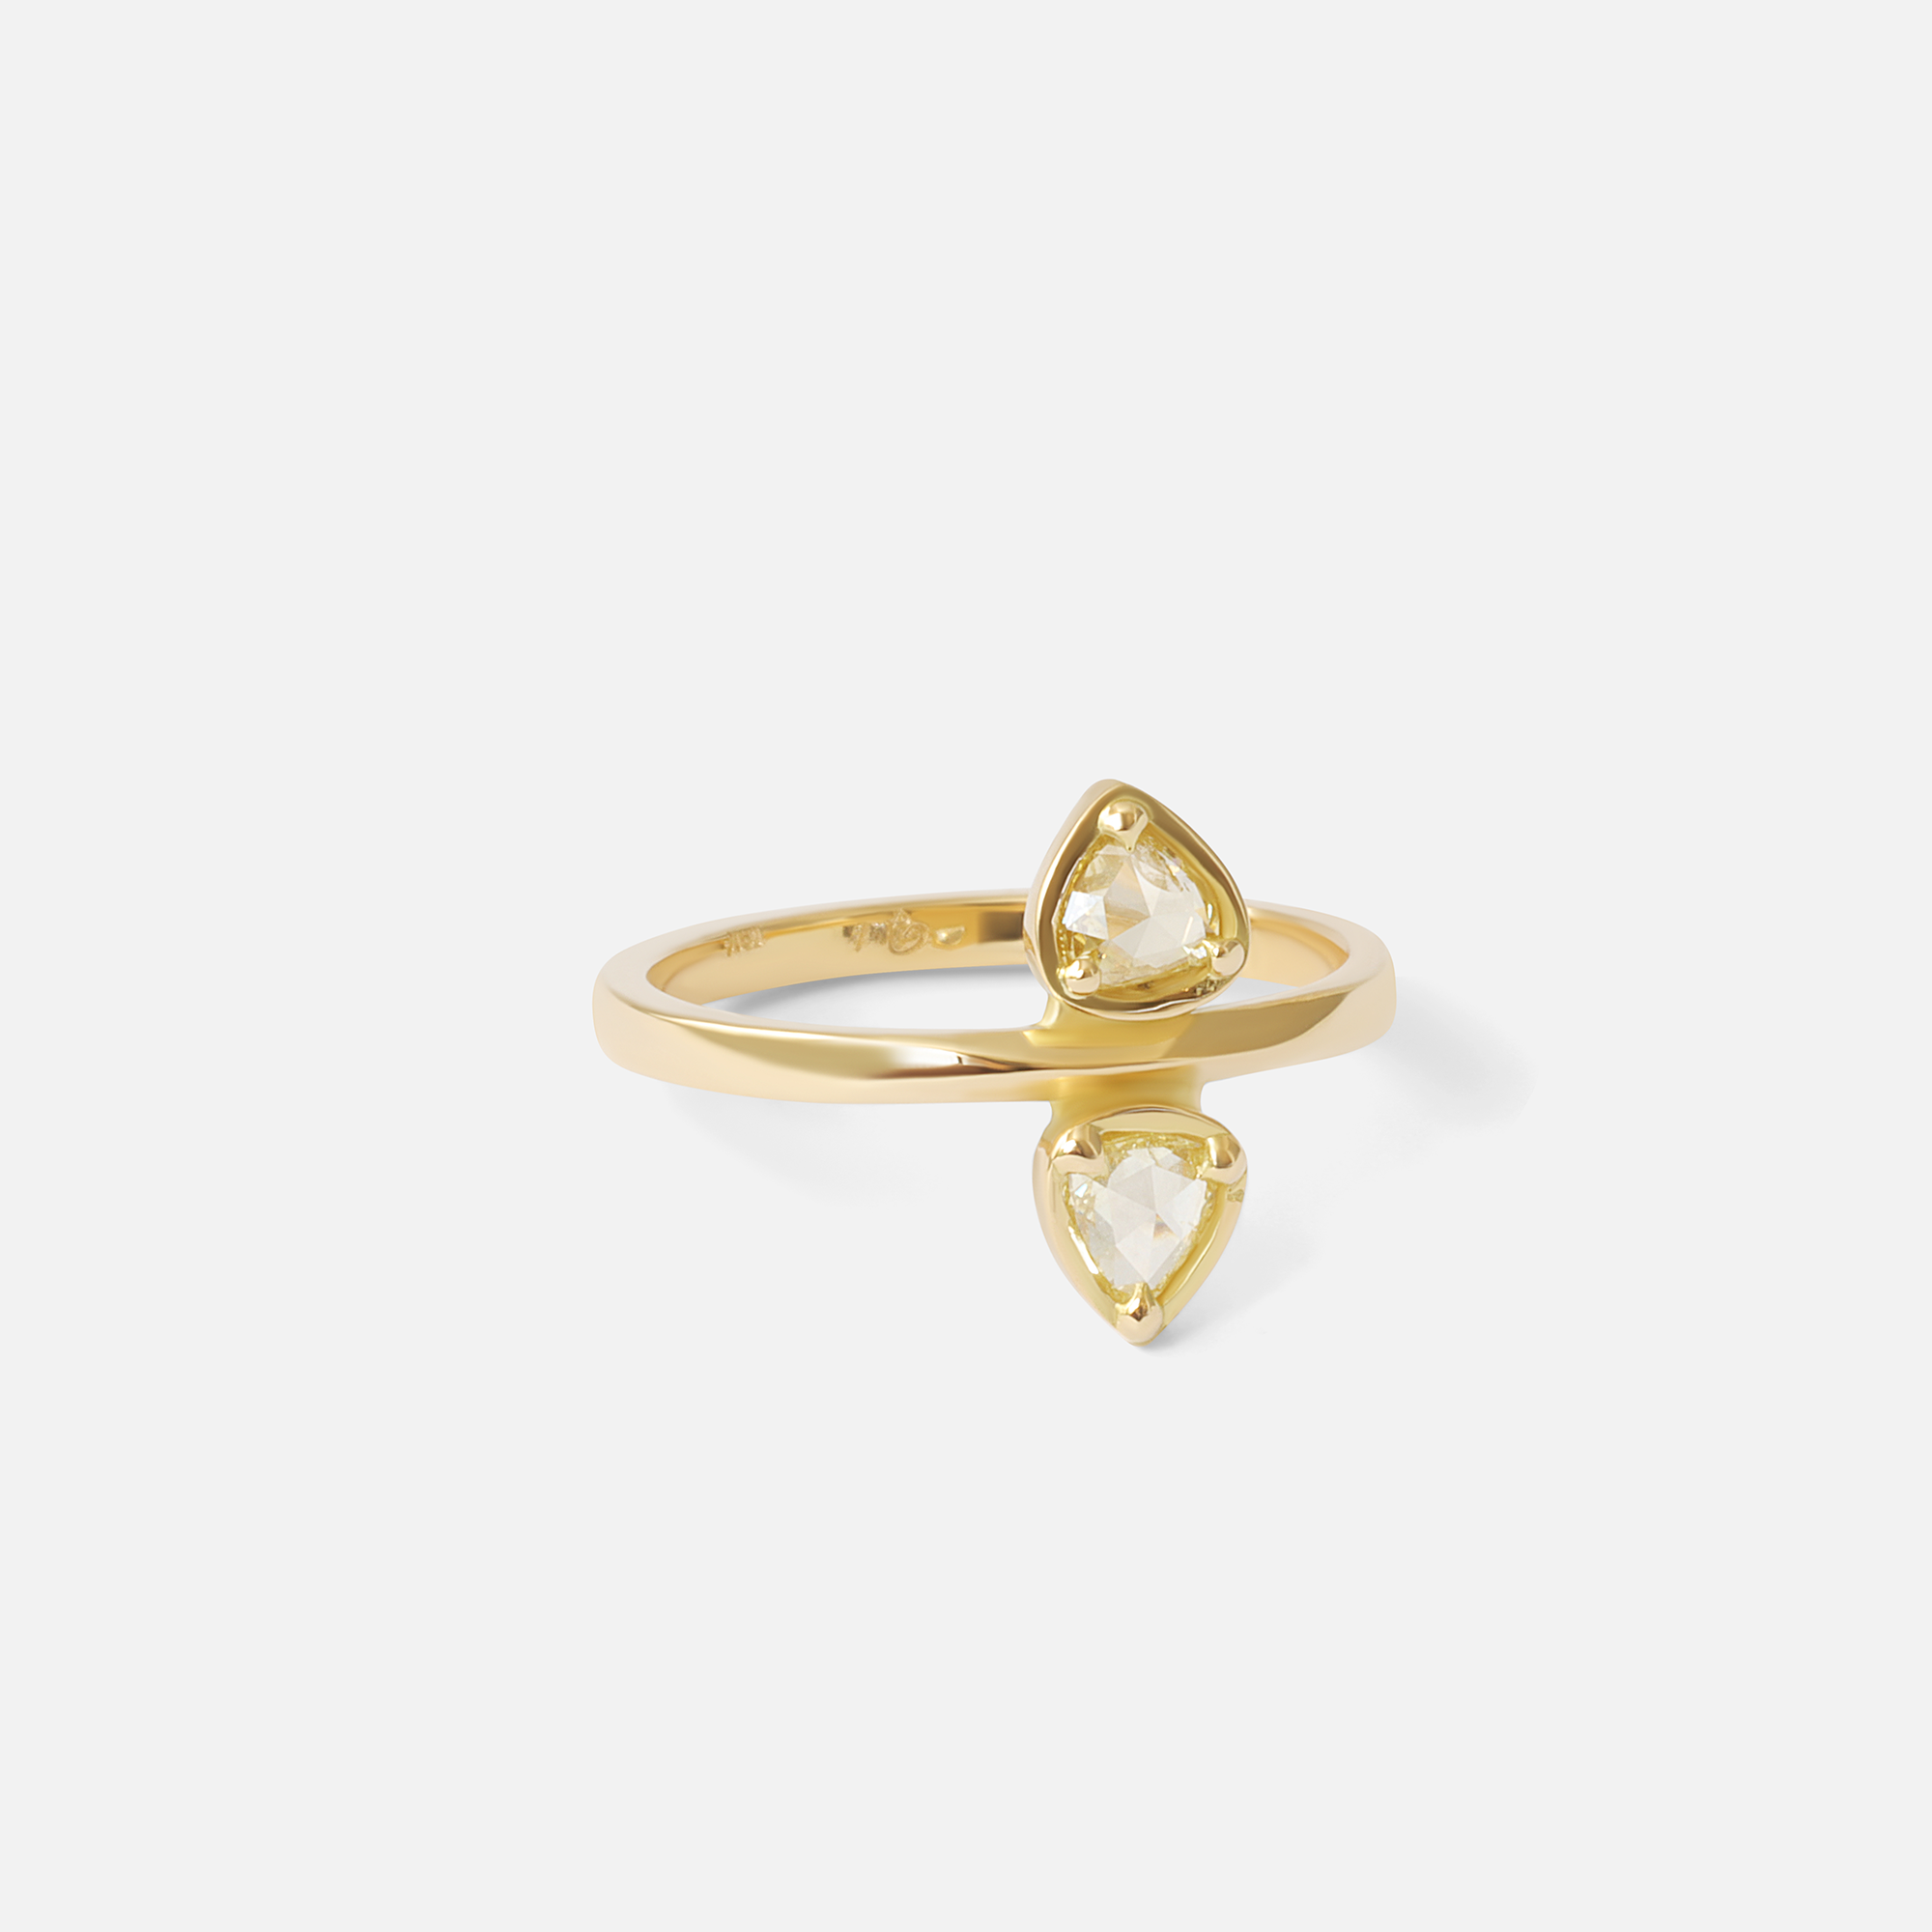 Toi Et Moi / 0.4ct Yellow Heart Diamond Ring By fitzgerald jewelry